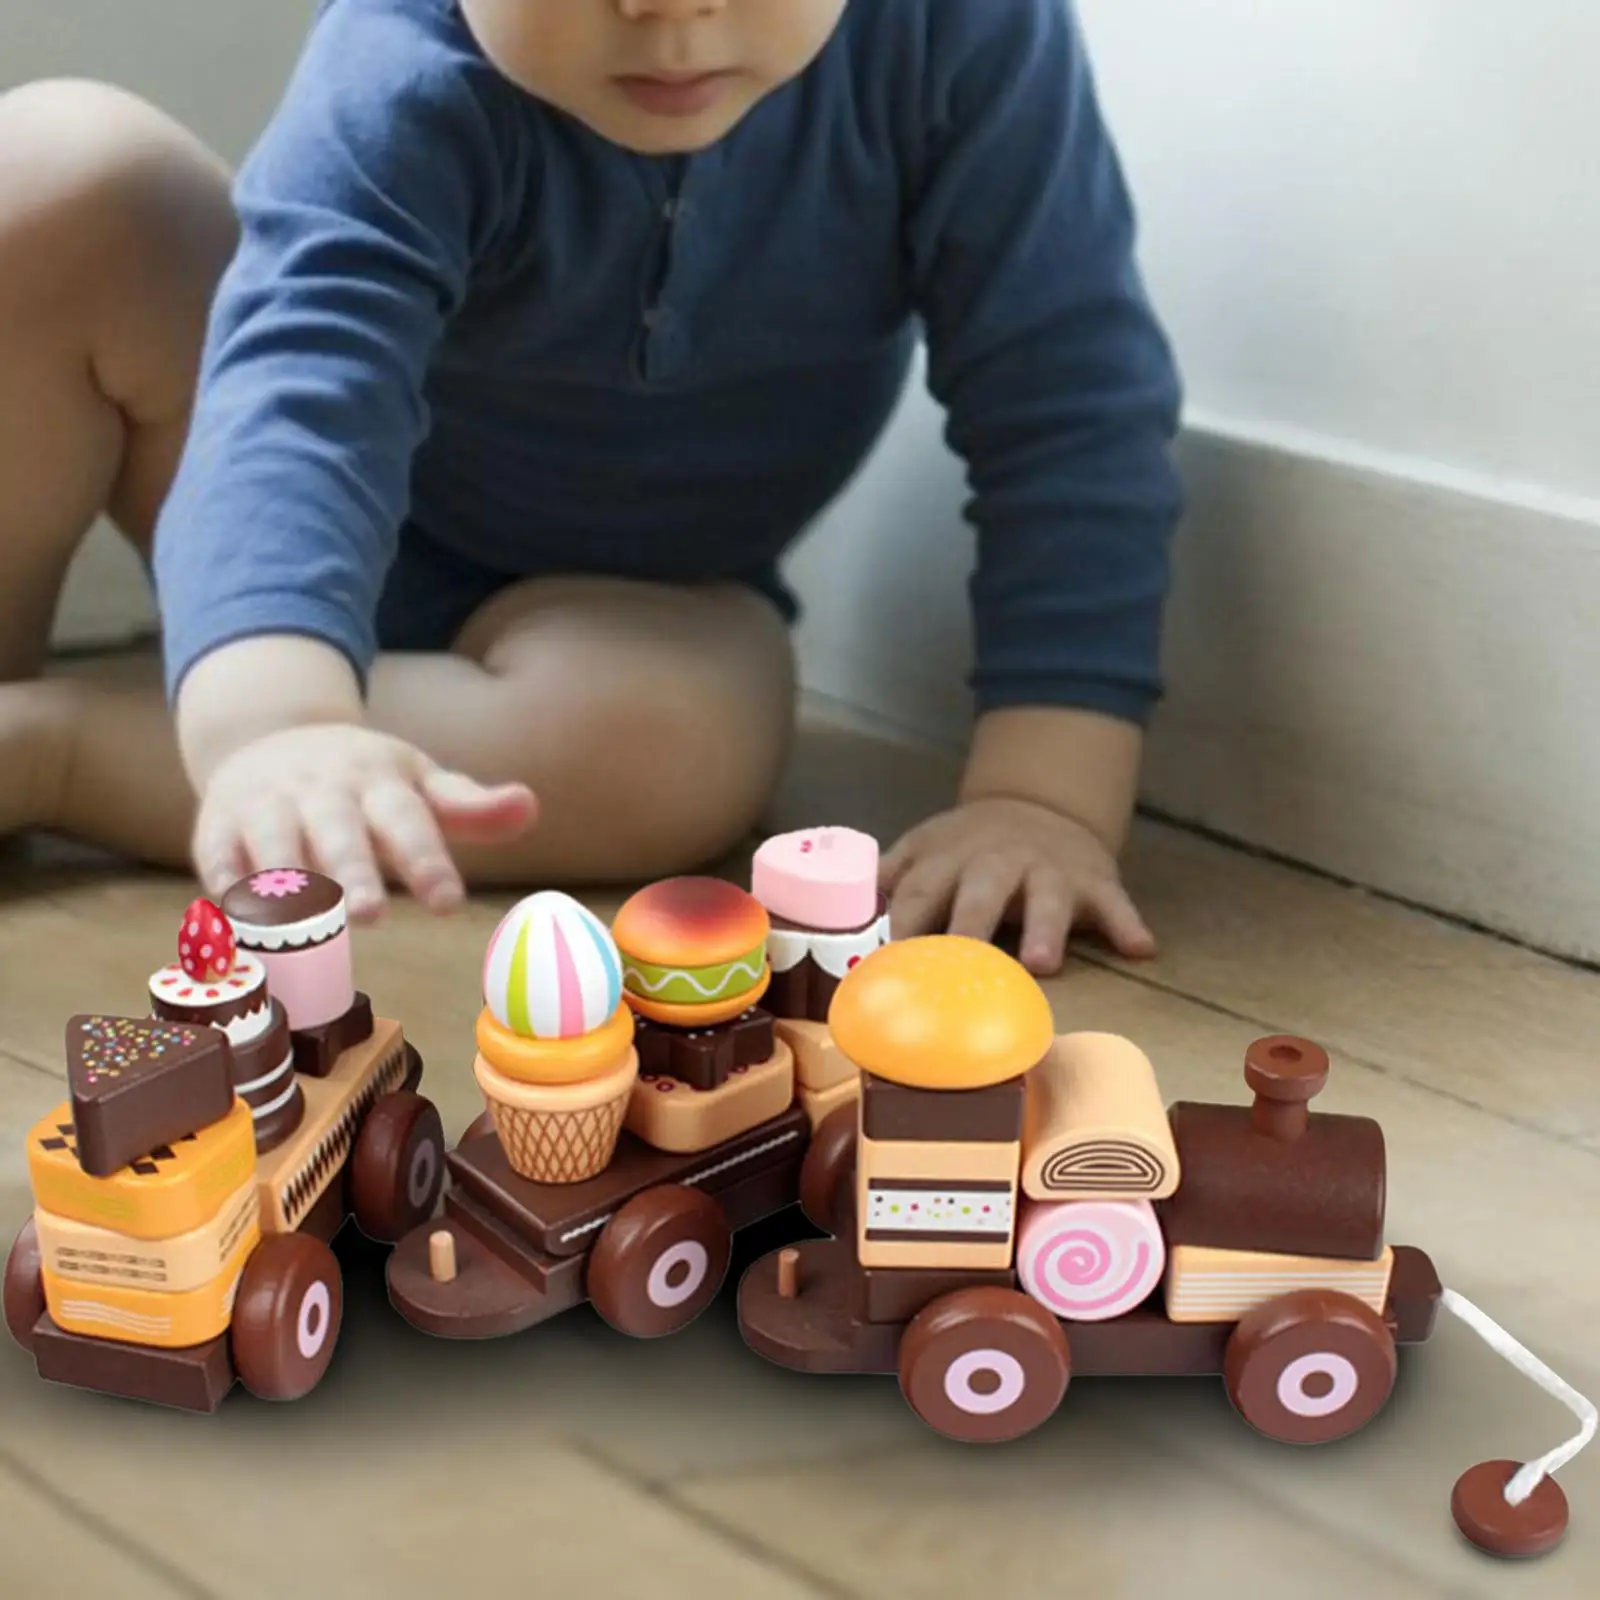 Montessori Train Cake Toys Pretend Play Developmental Food Accessories Early Educational for Preschool Toddlers Kids Gifts